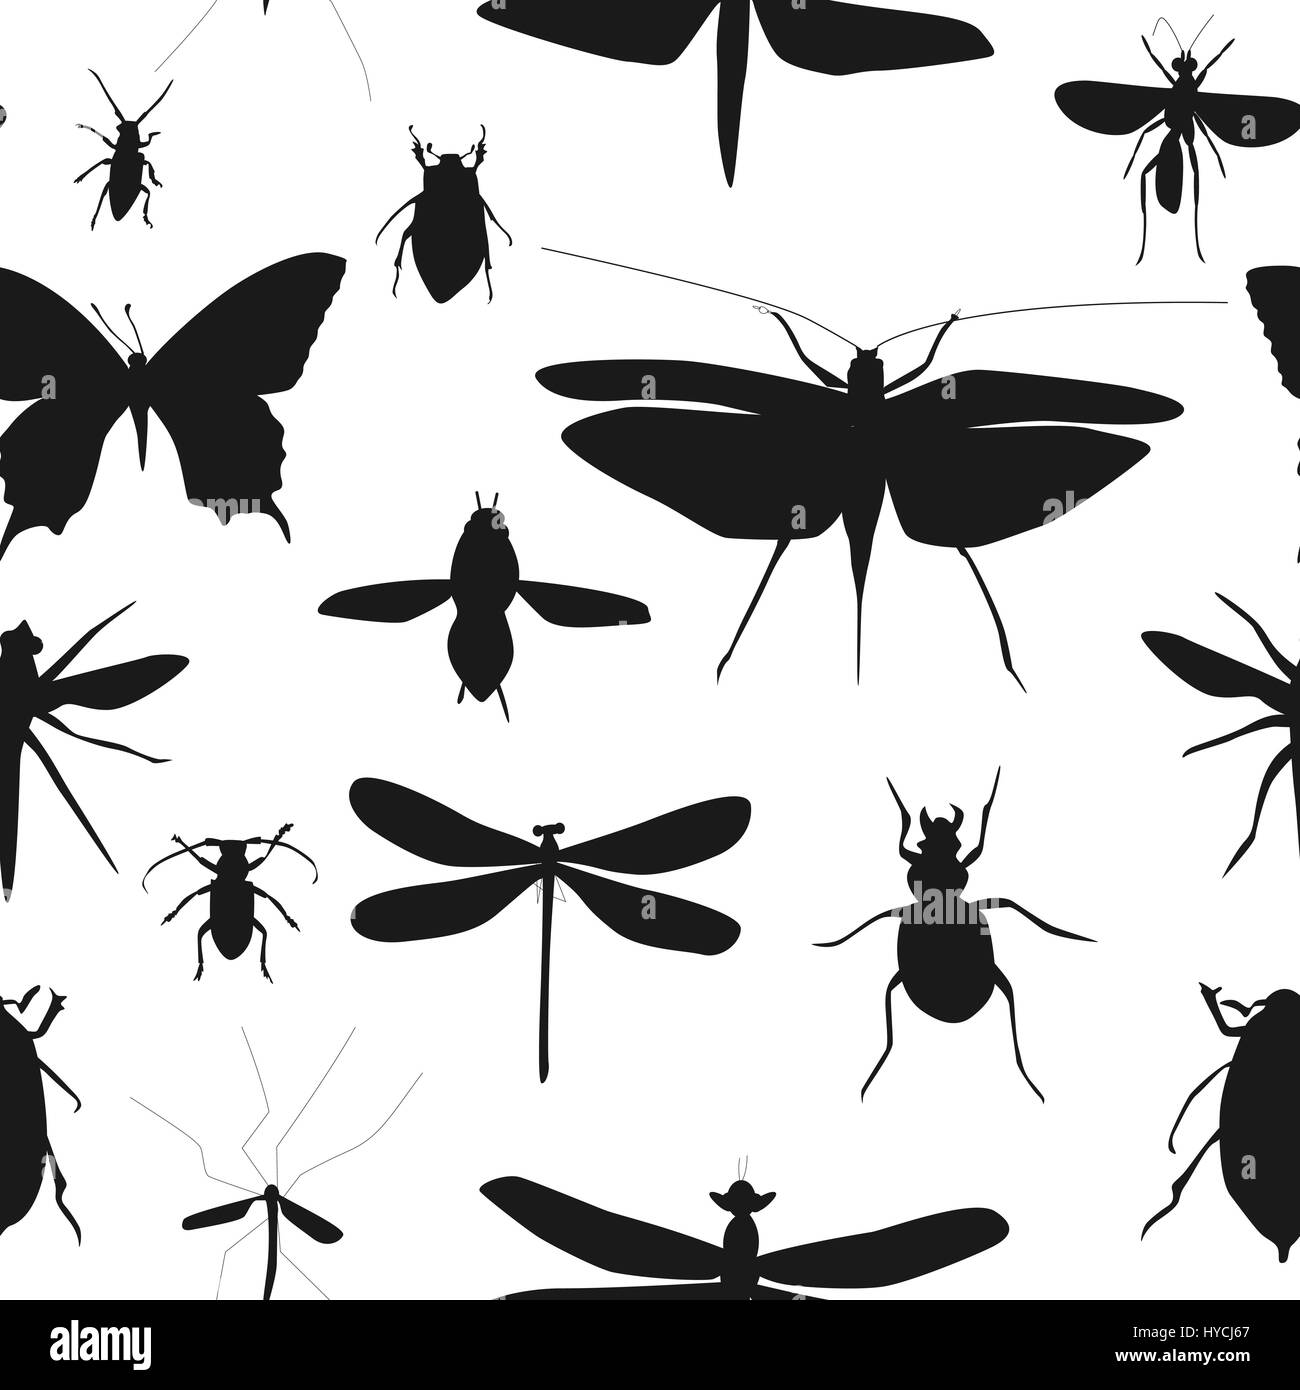 Silhouettes Set of Beetles, Dragonflies and Butterflies Seamless Stock Vector